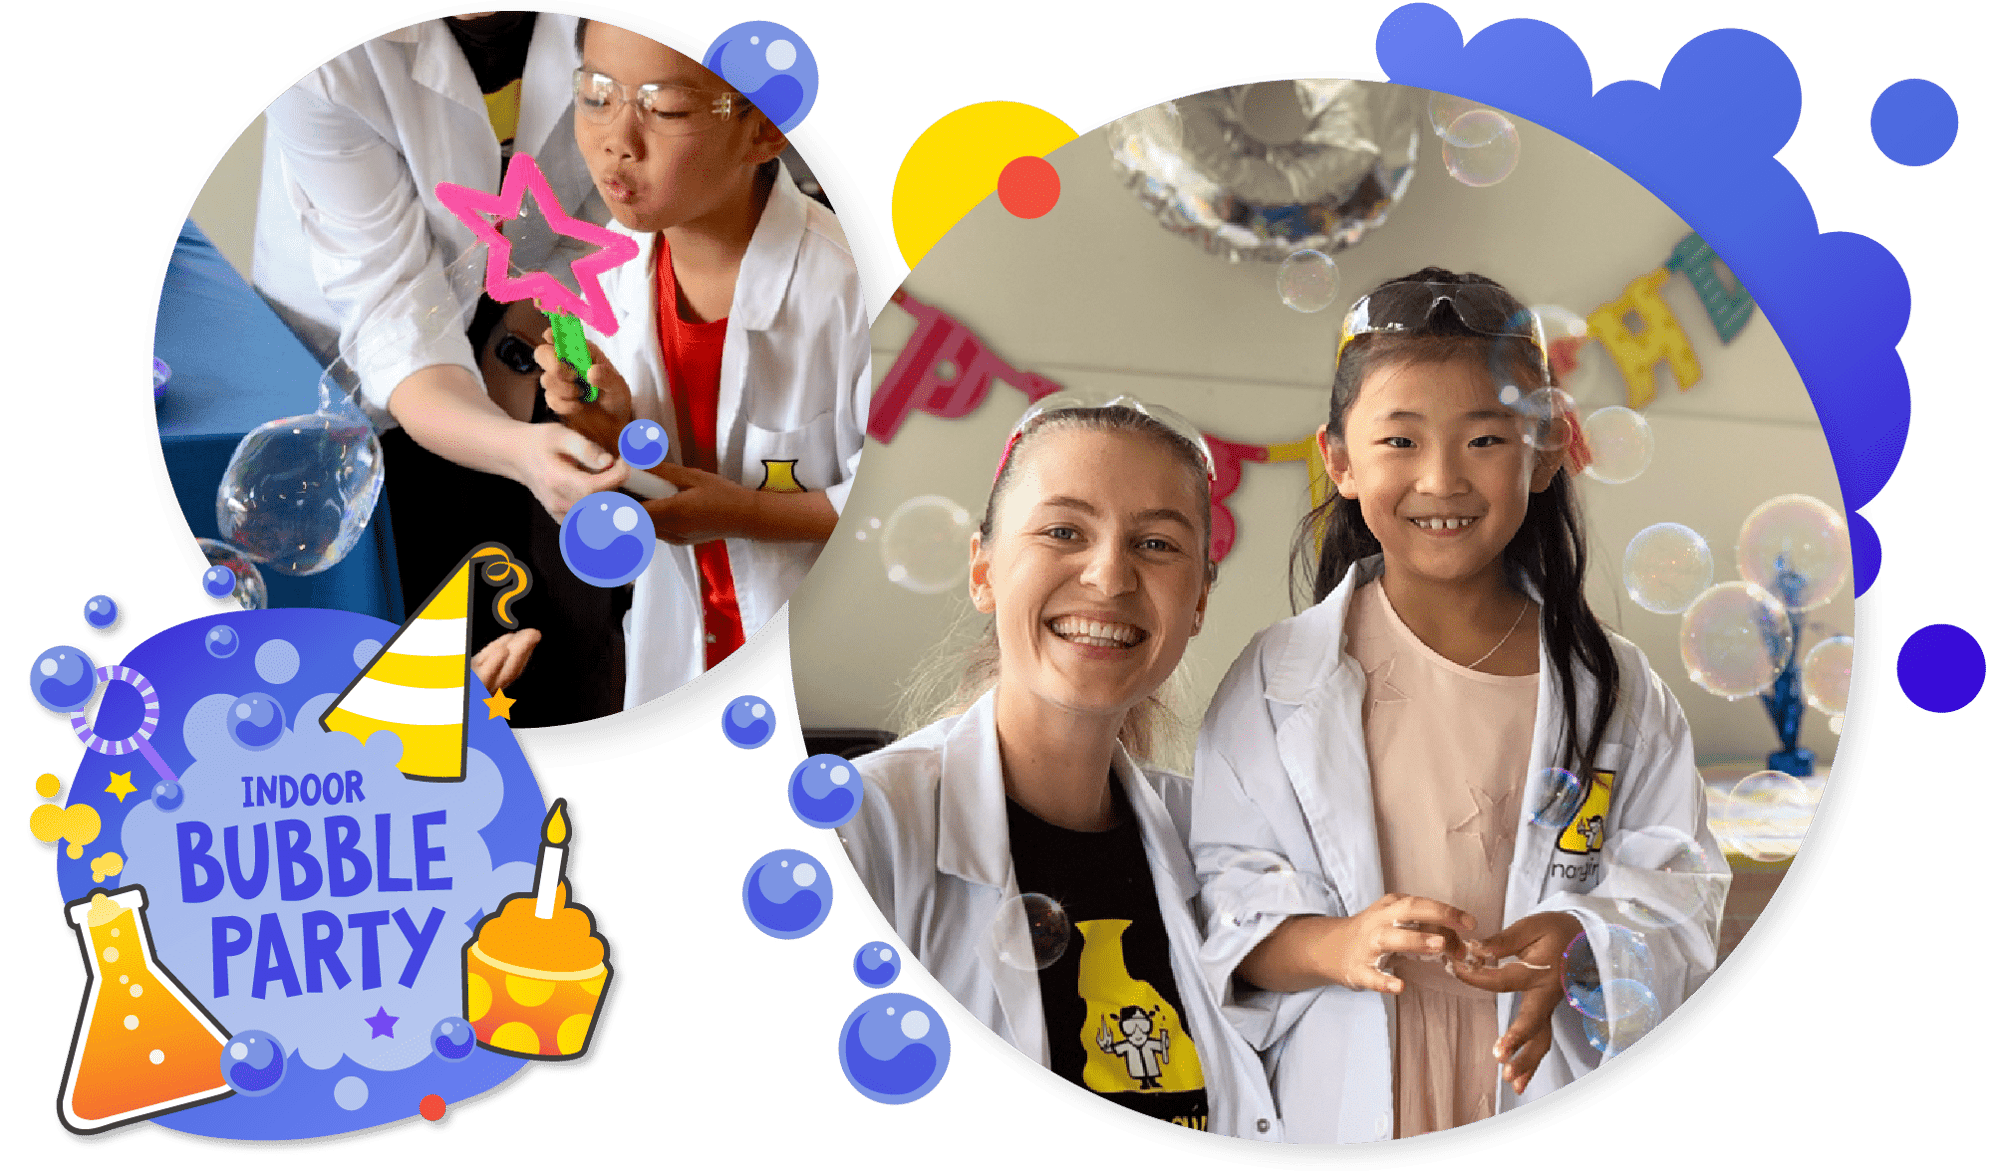 Nanogirl bubble science birthday parties for kids